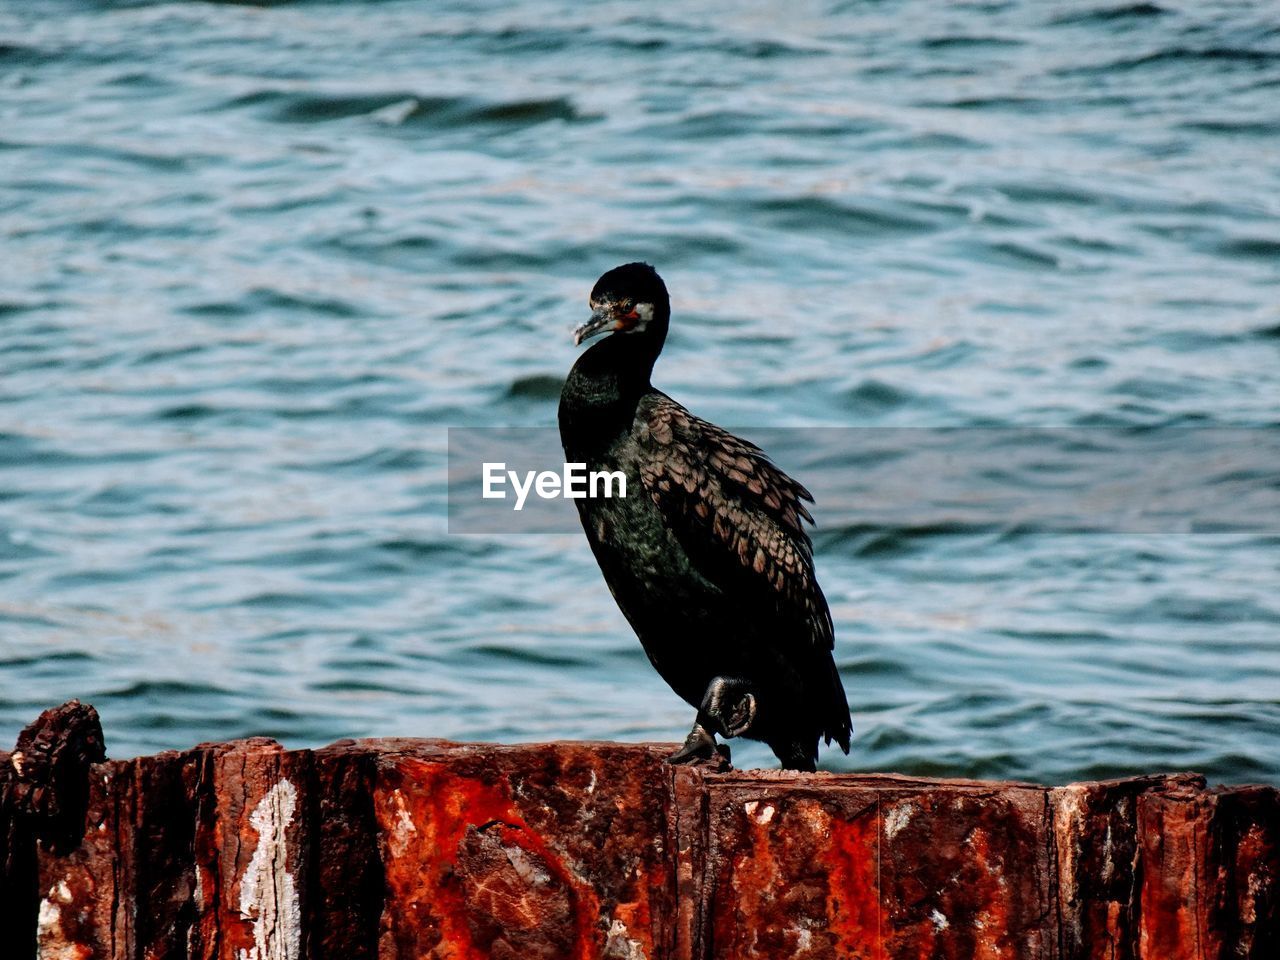 Bird perching on wooden wall against sea